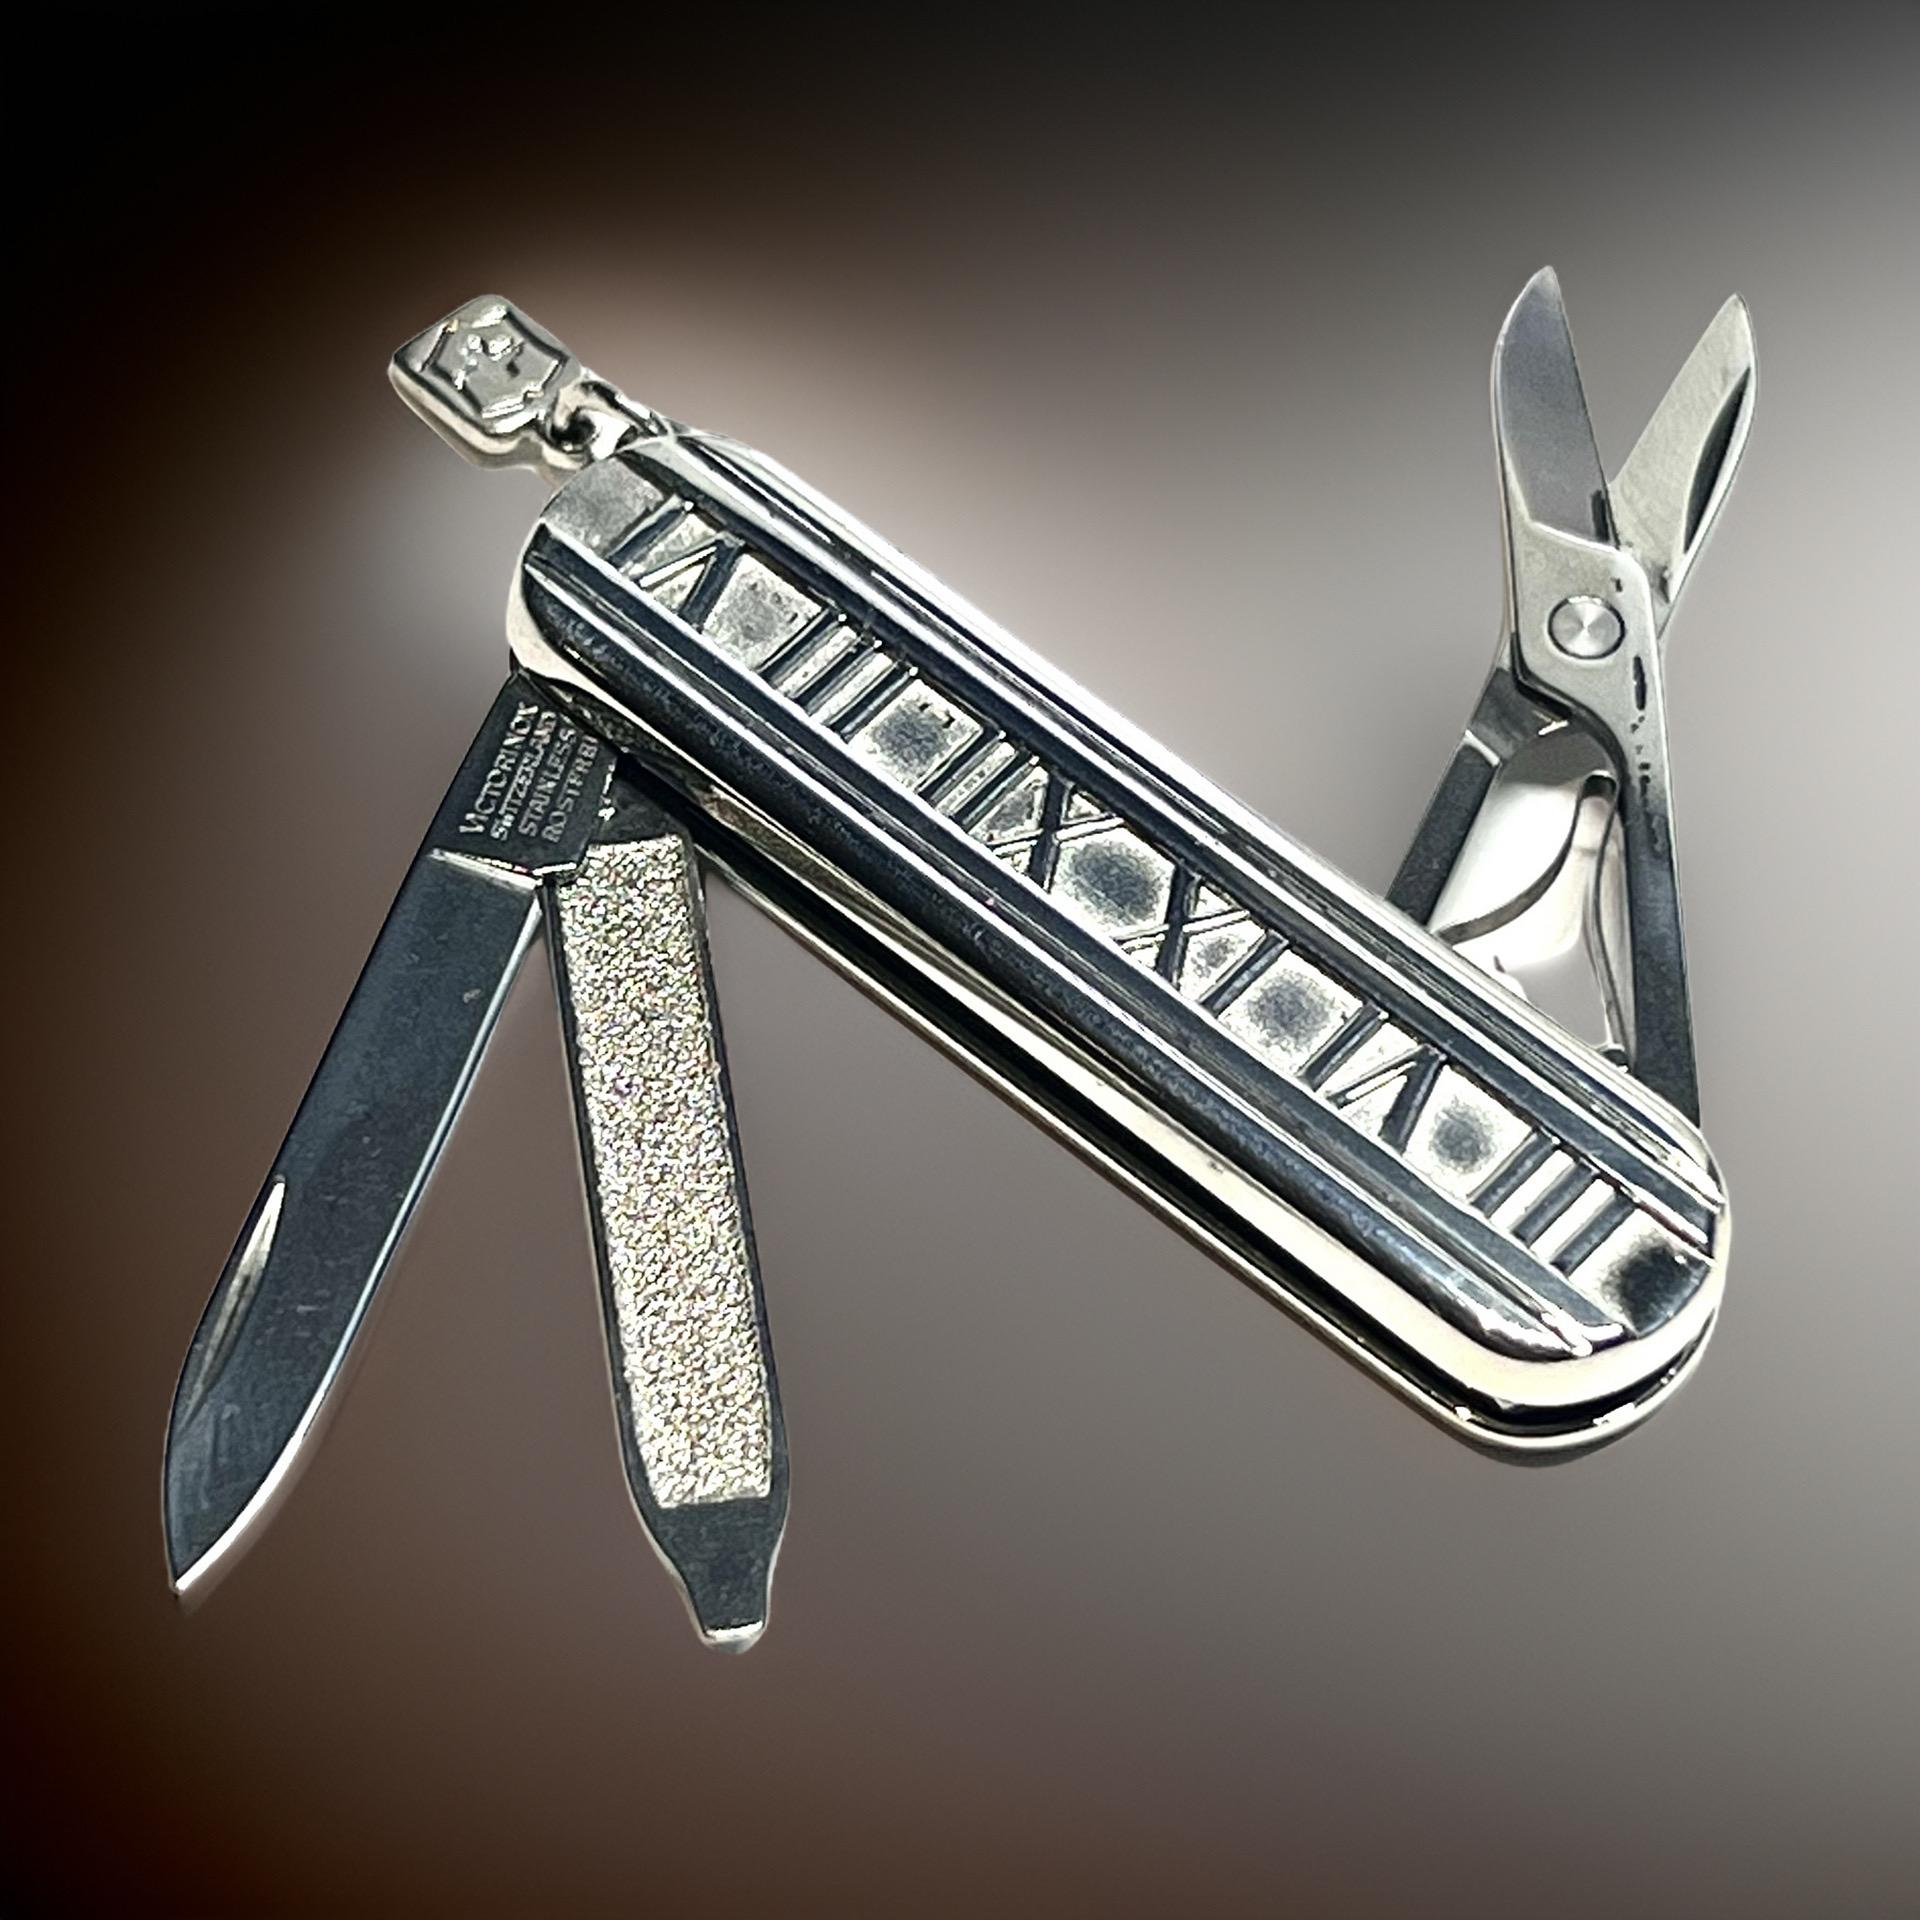 Authentic Rare Tiffany & Co Estate Atlas Swiss Army Knife Sterling Silver TIF625

This elegant Authentic Rare Atlas Tiffany & Co Swiss Army pocket knife is made of sterling silver and has a weight of 45 Grams.

TRUSTED SELLER SINCE 2002

PLEASE SEE